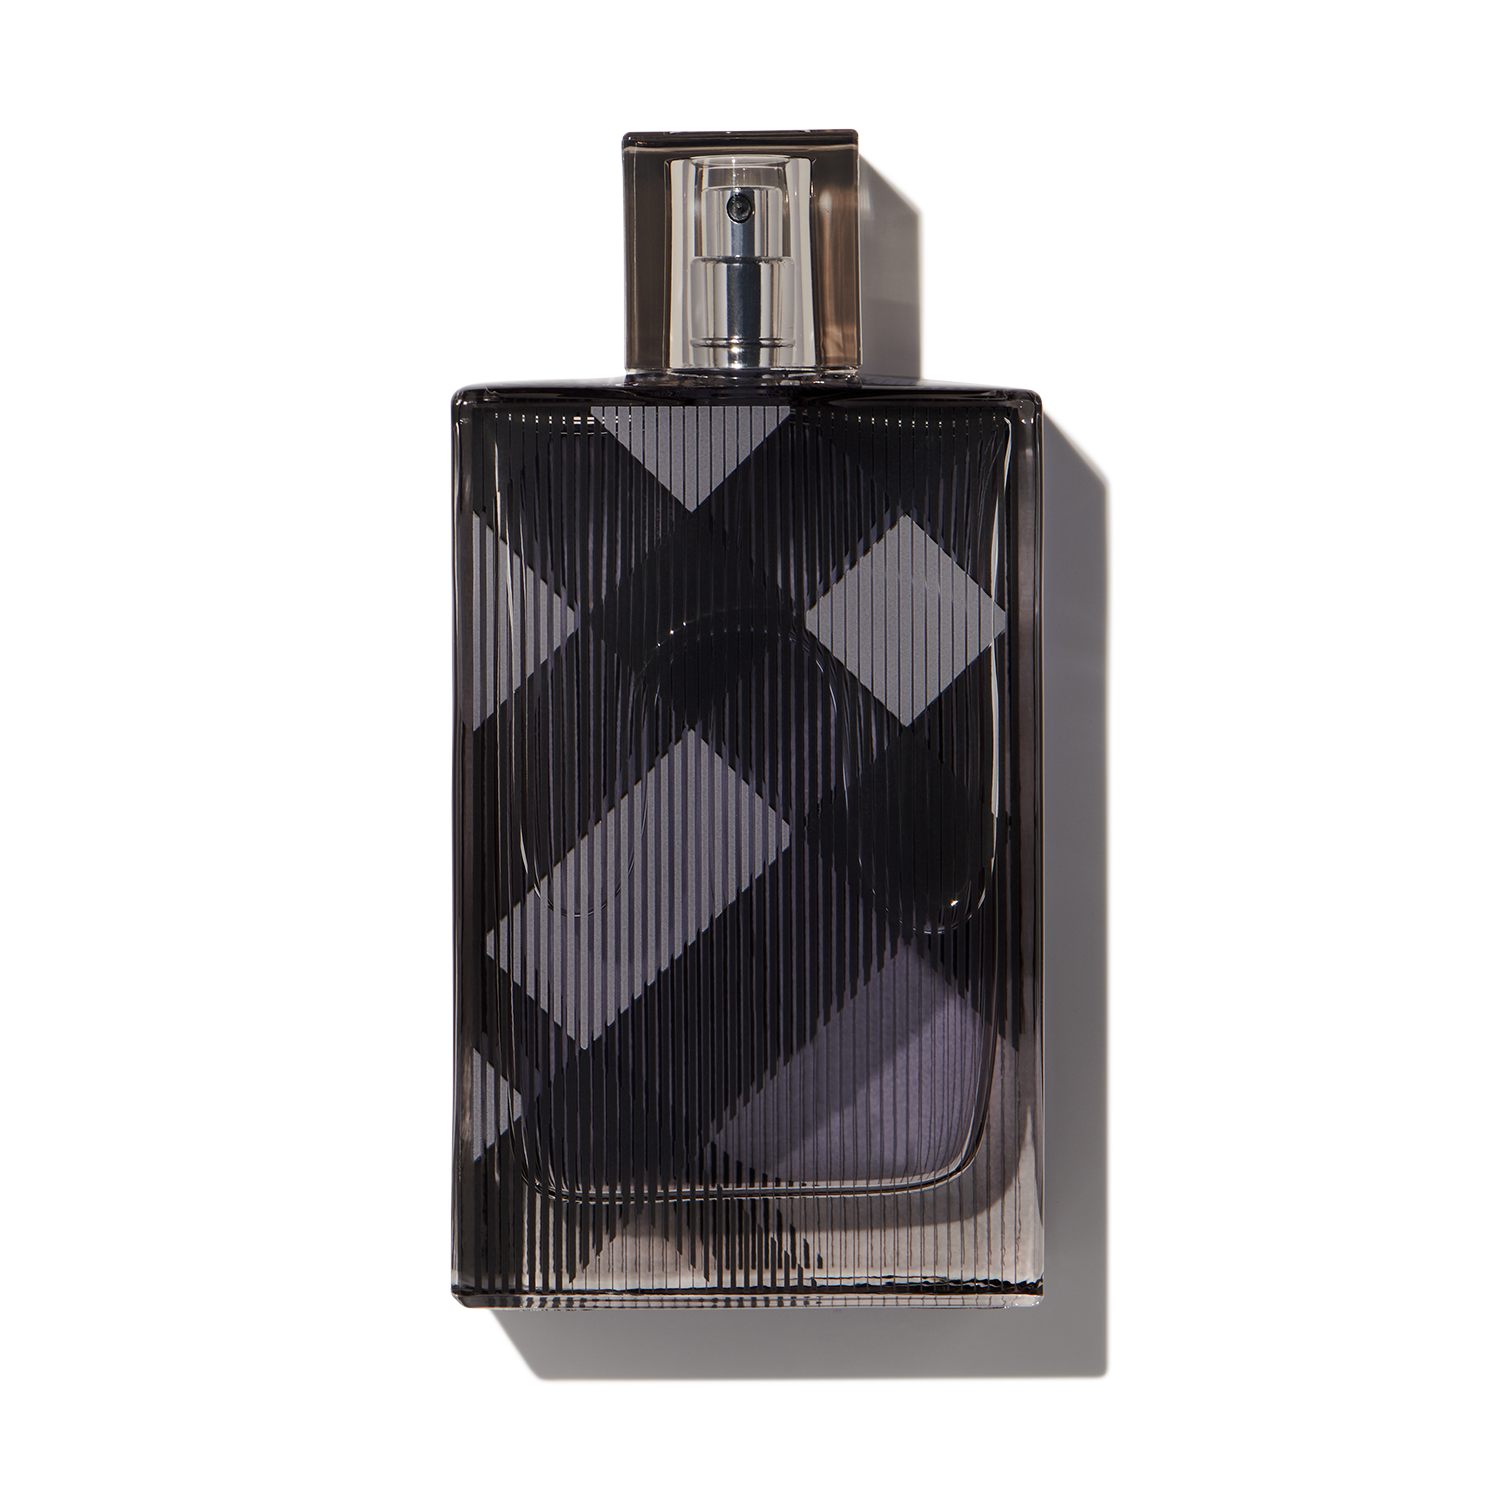 Burberry Brit for Men EDT by Burberry $/month | Scentbird